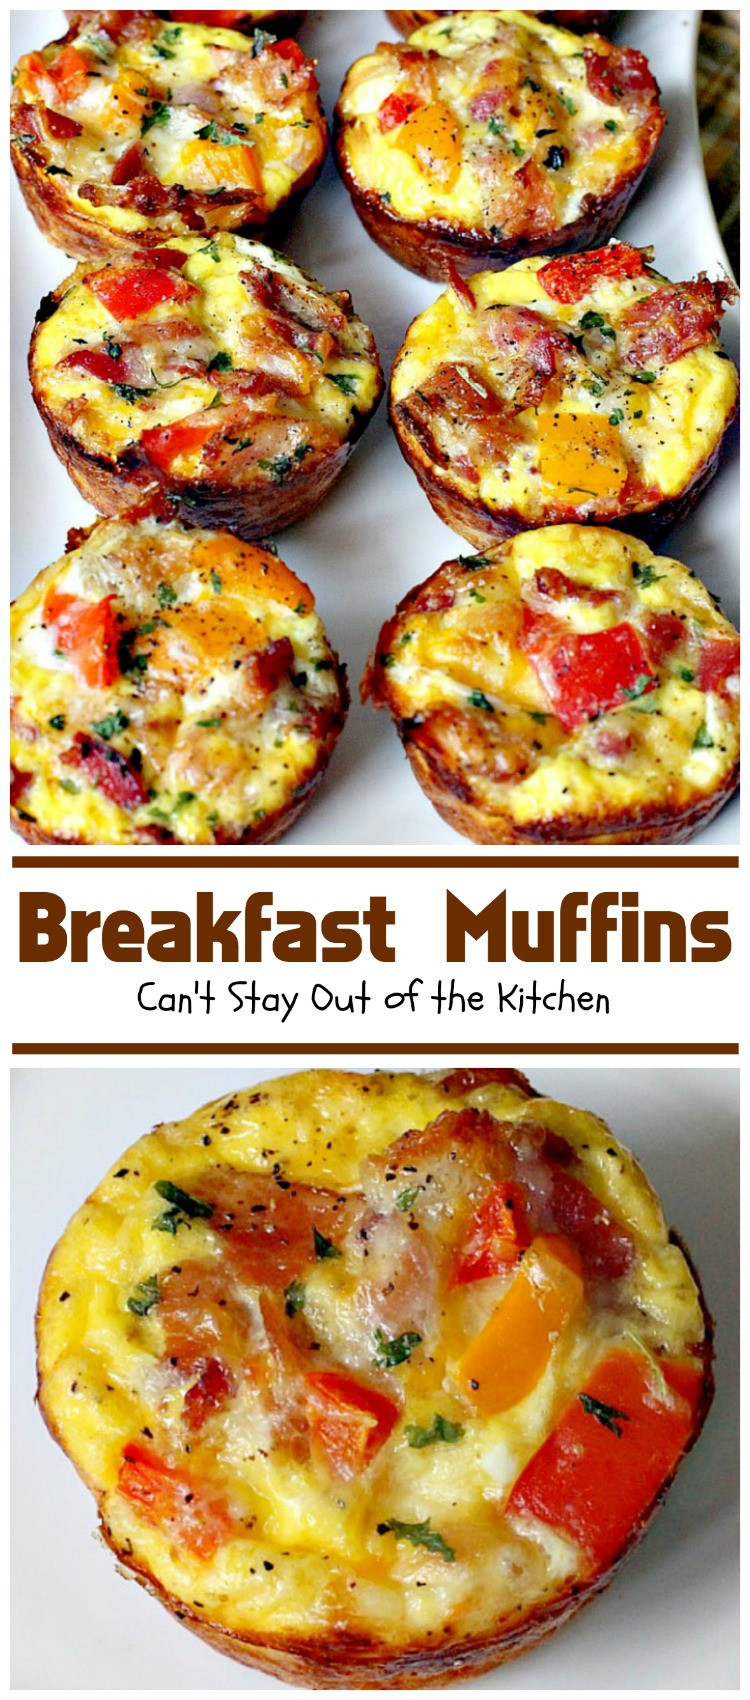 Breakfast Muffins Recipe
 Breakfast Muffins Can t Stay Out of the Kitchen